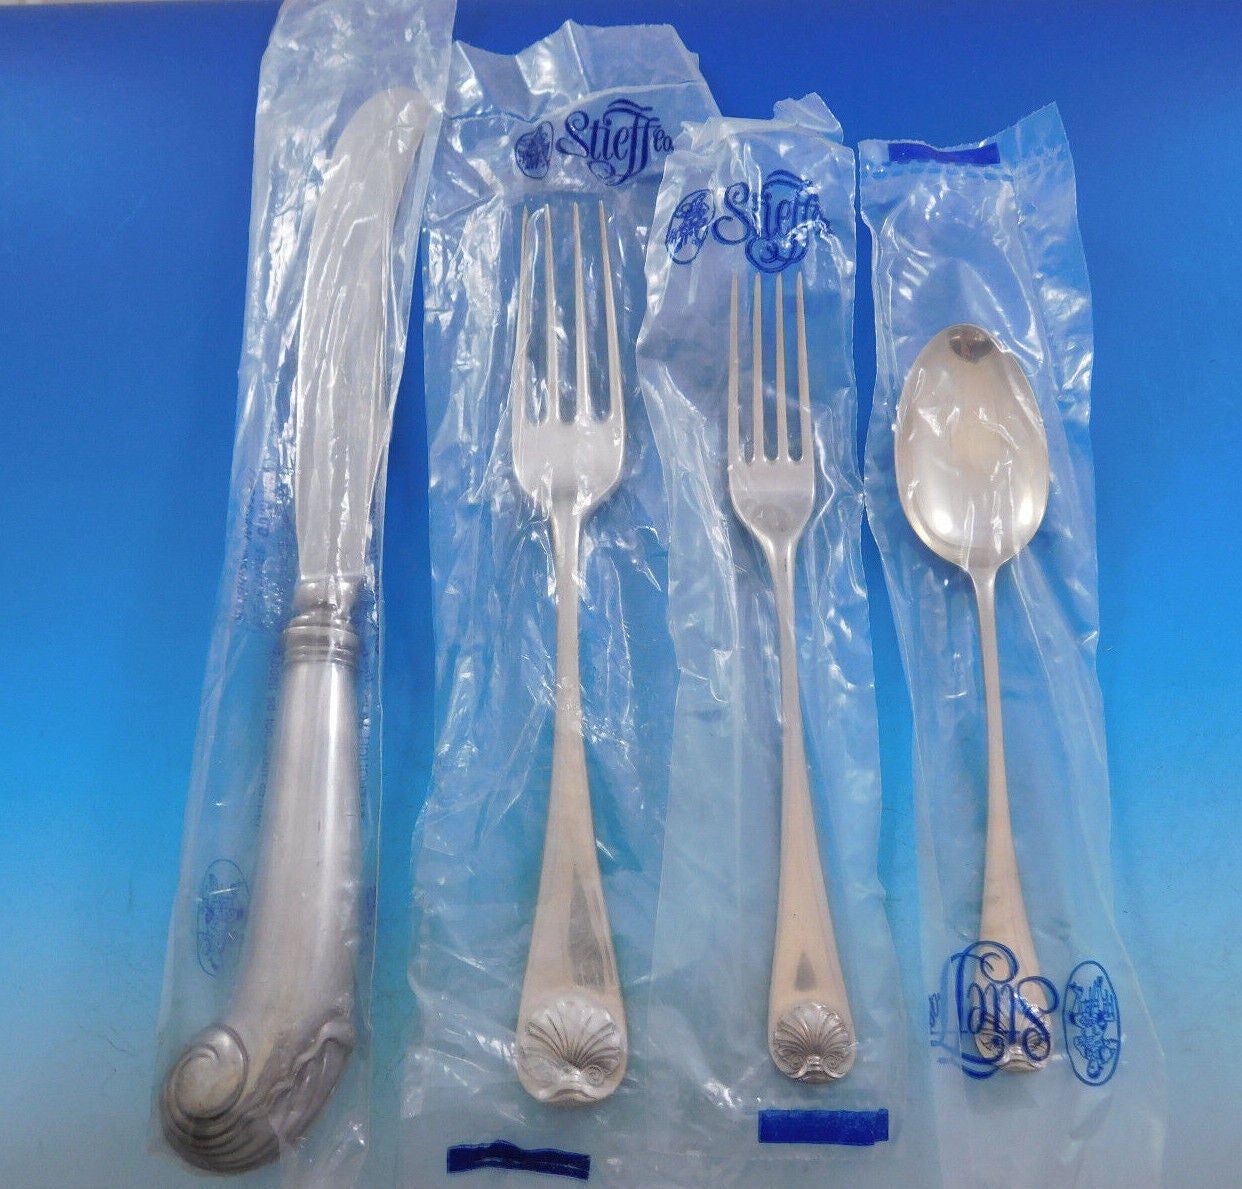 Large & heavy Williamsburg Shell by Stieff sterling silver dinnerR flatware set - 51 Pieces. With wonderful pistol-grip handles! This set appears virtually unused! This set includes:


12 dinner knives, 9 3/4